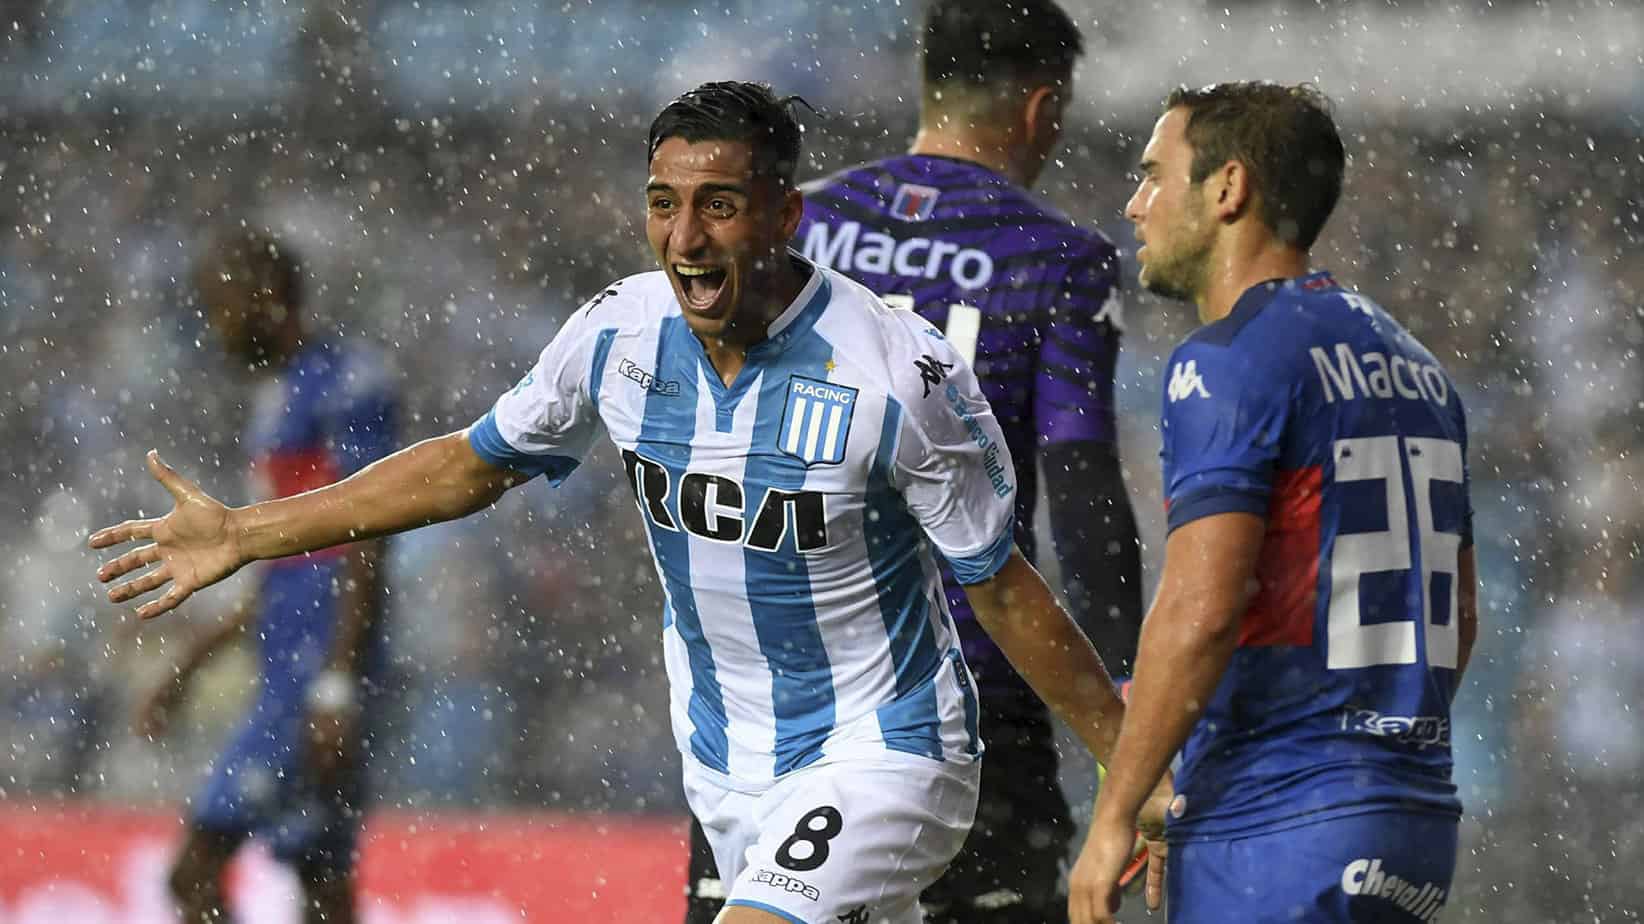 Racing vs. Tigre – Betting Odds and Free Pick